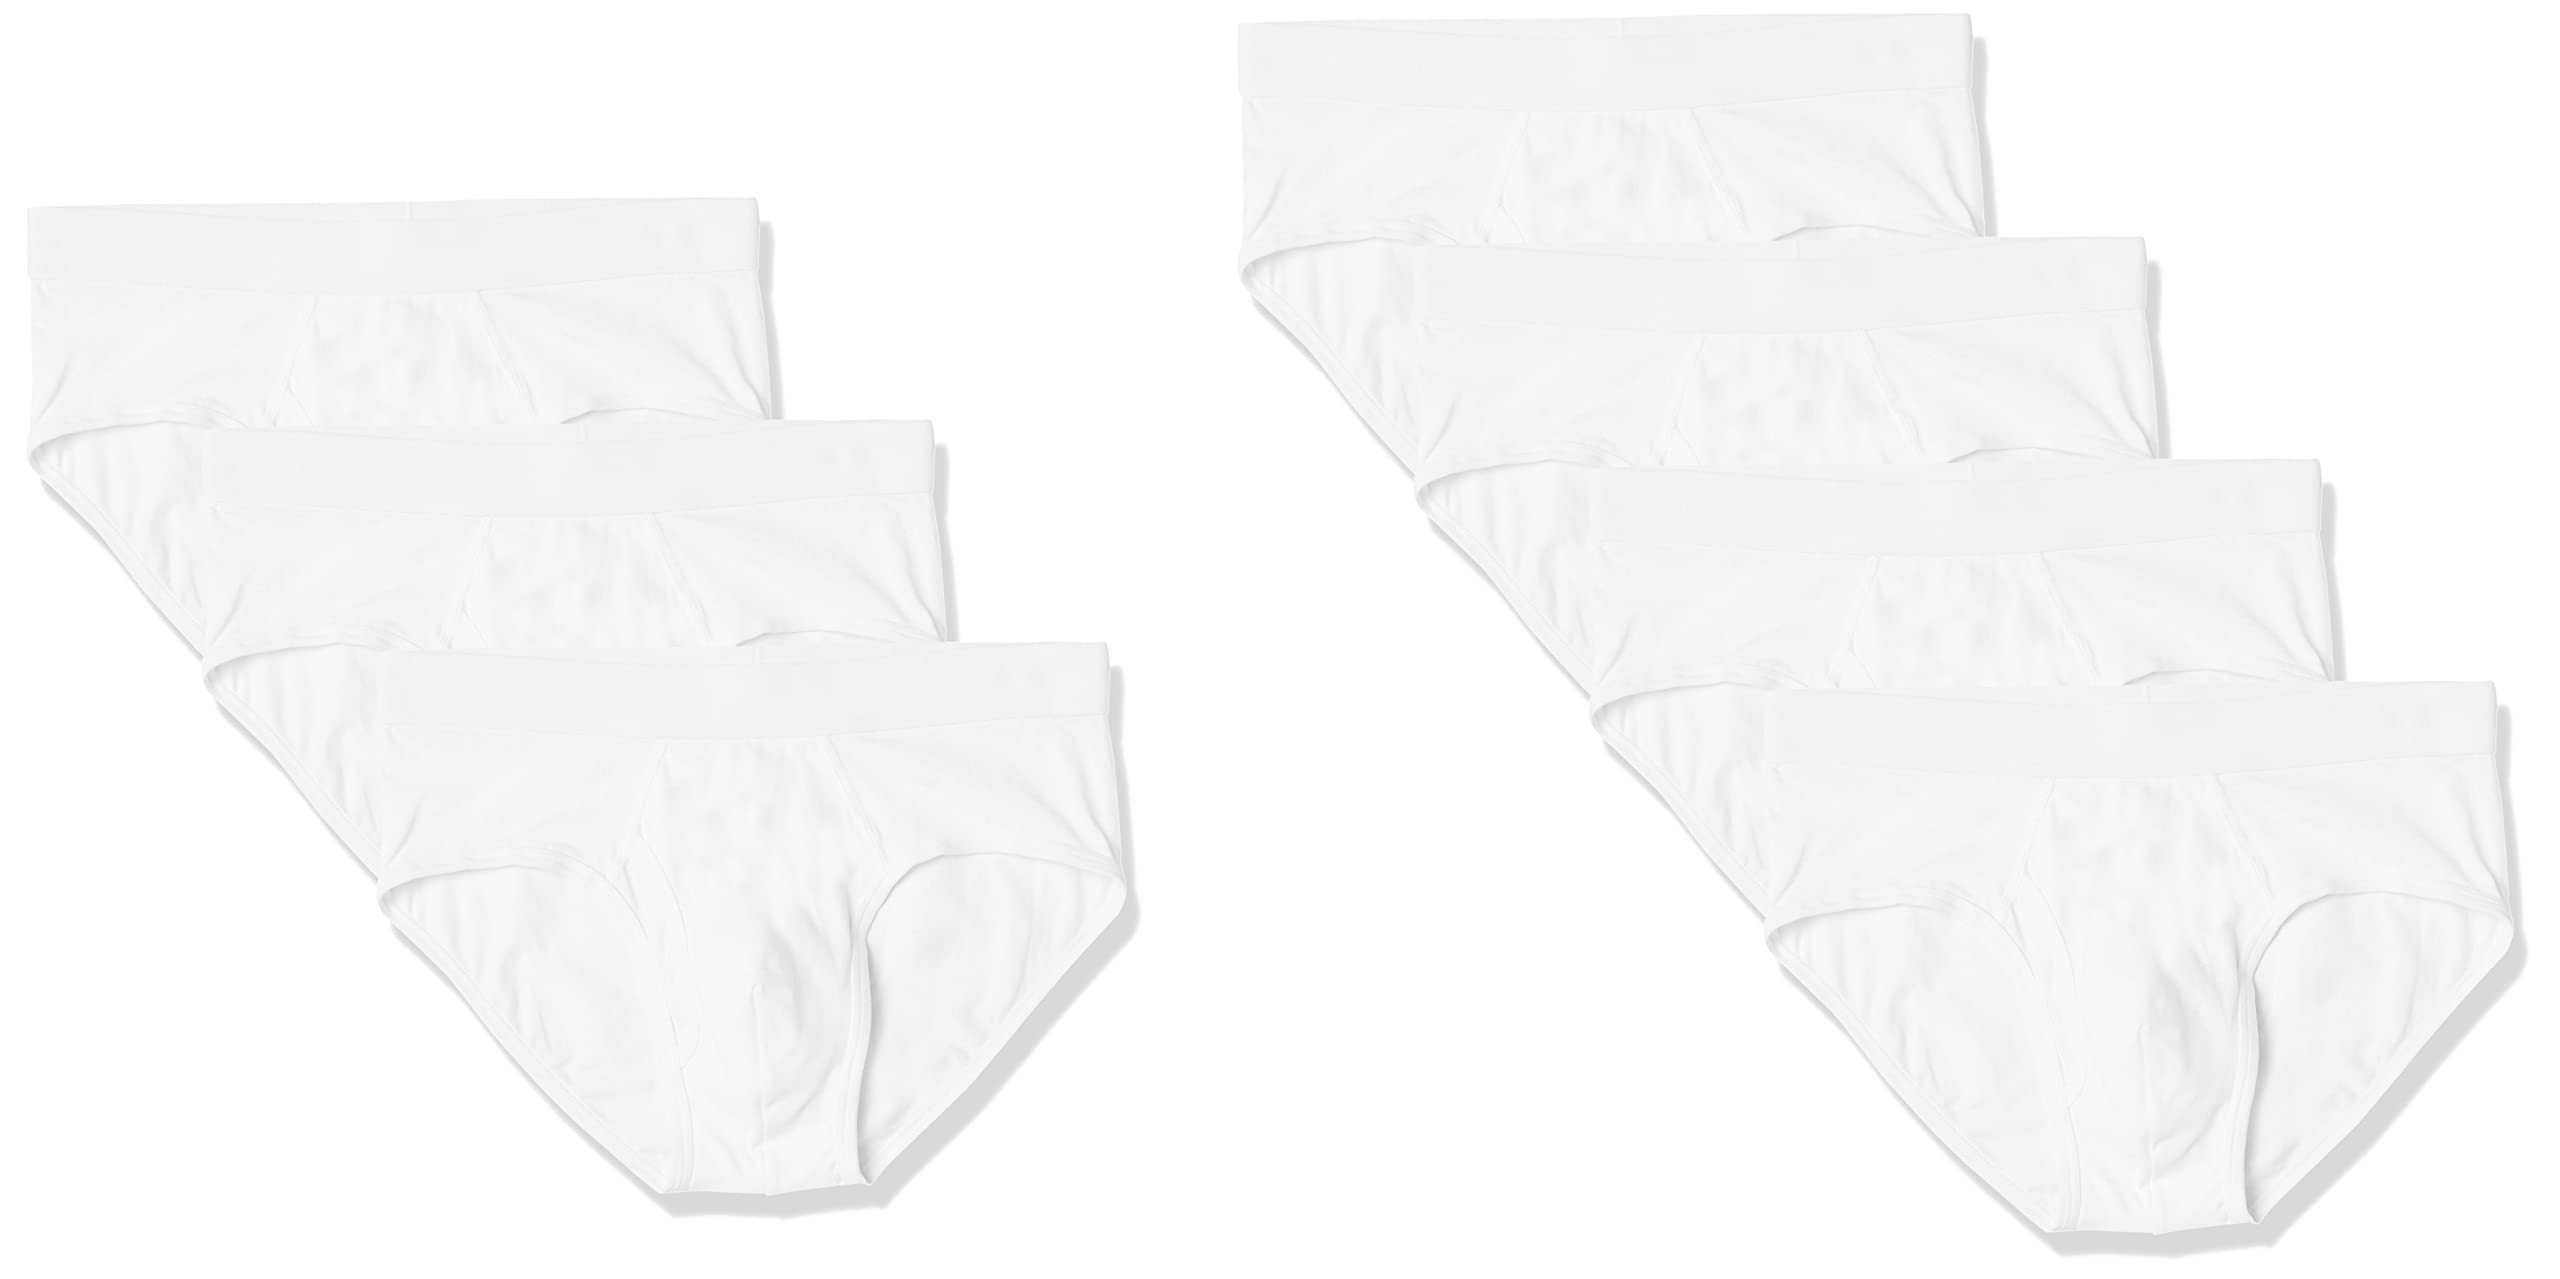 (3X/4X Only) Amazon Essentials Men's Cotton Jersey Brief (Available in Big & Tall), Pack of 7, White $4.7